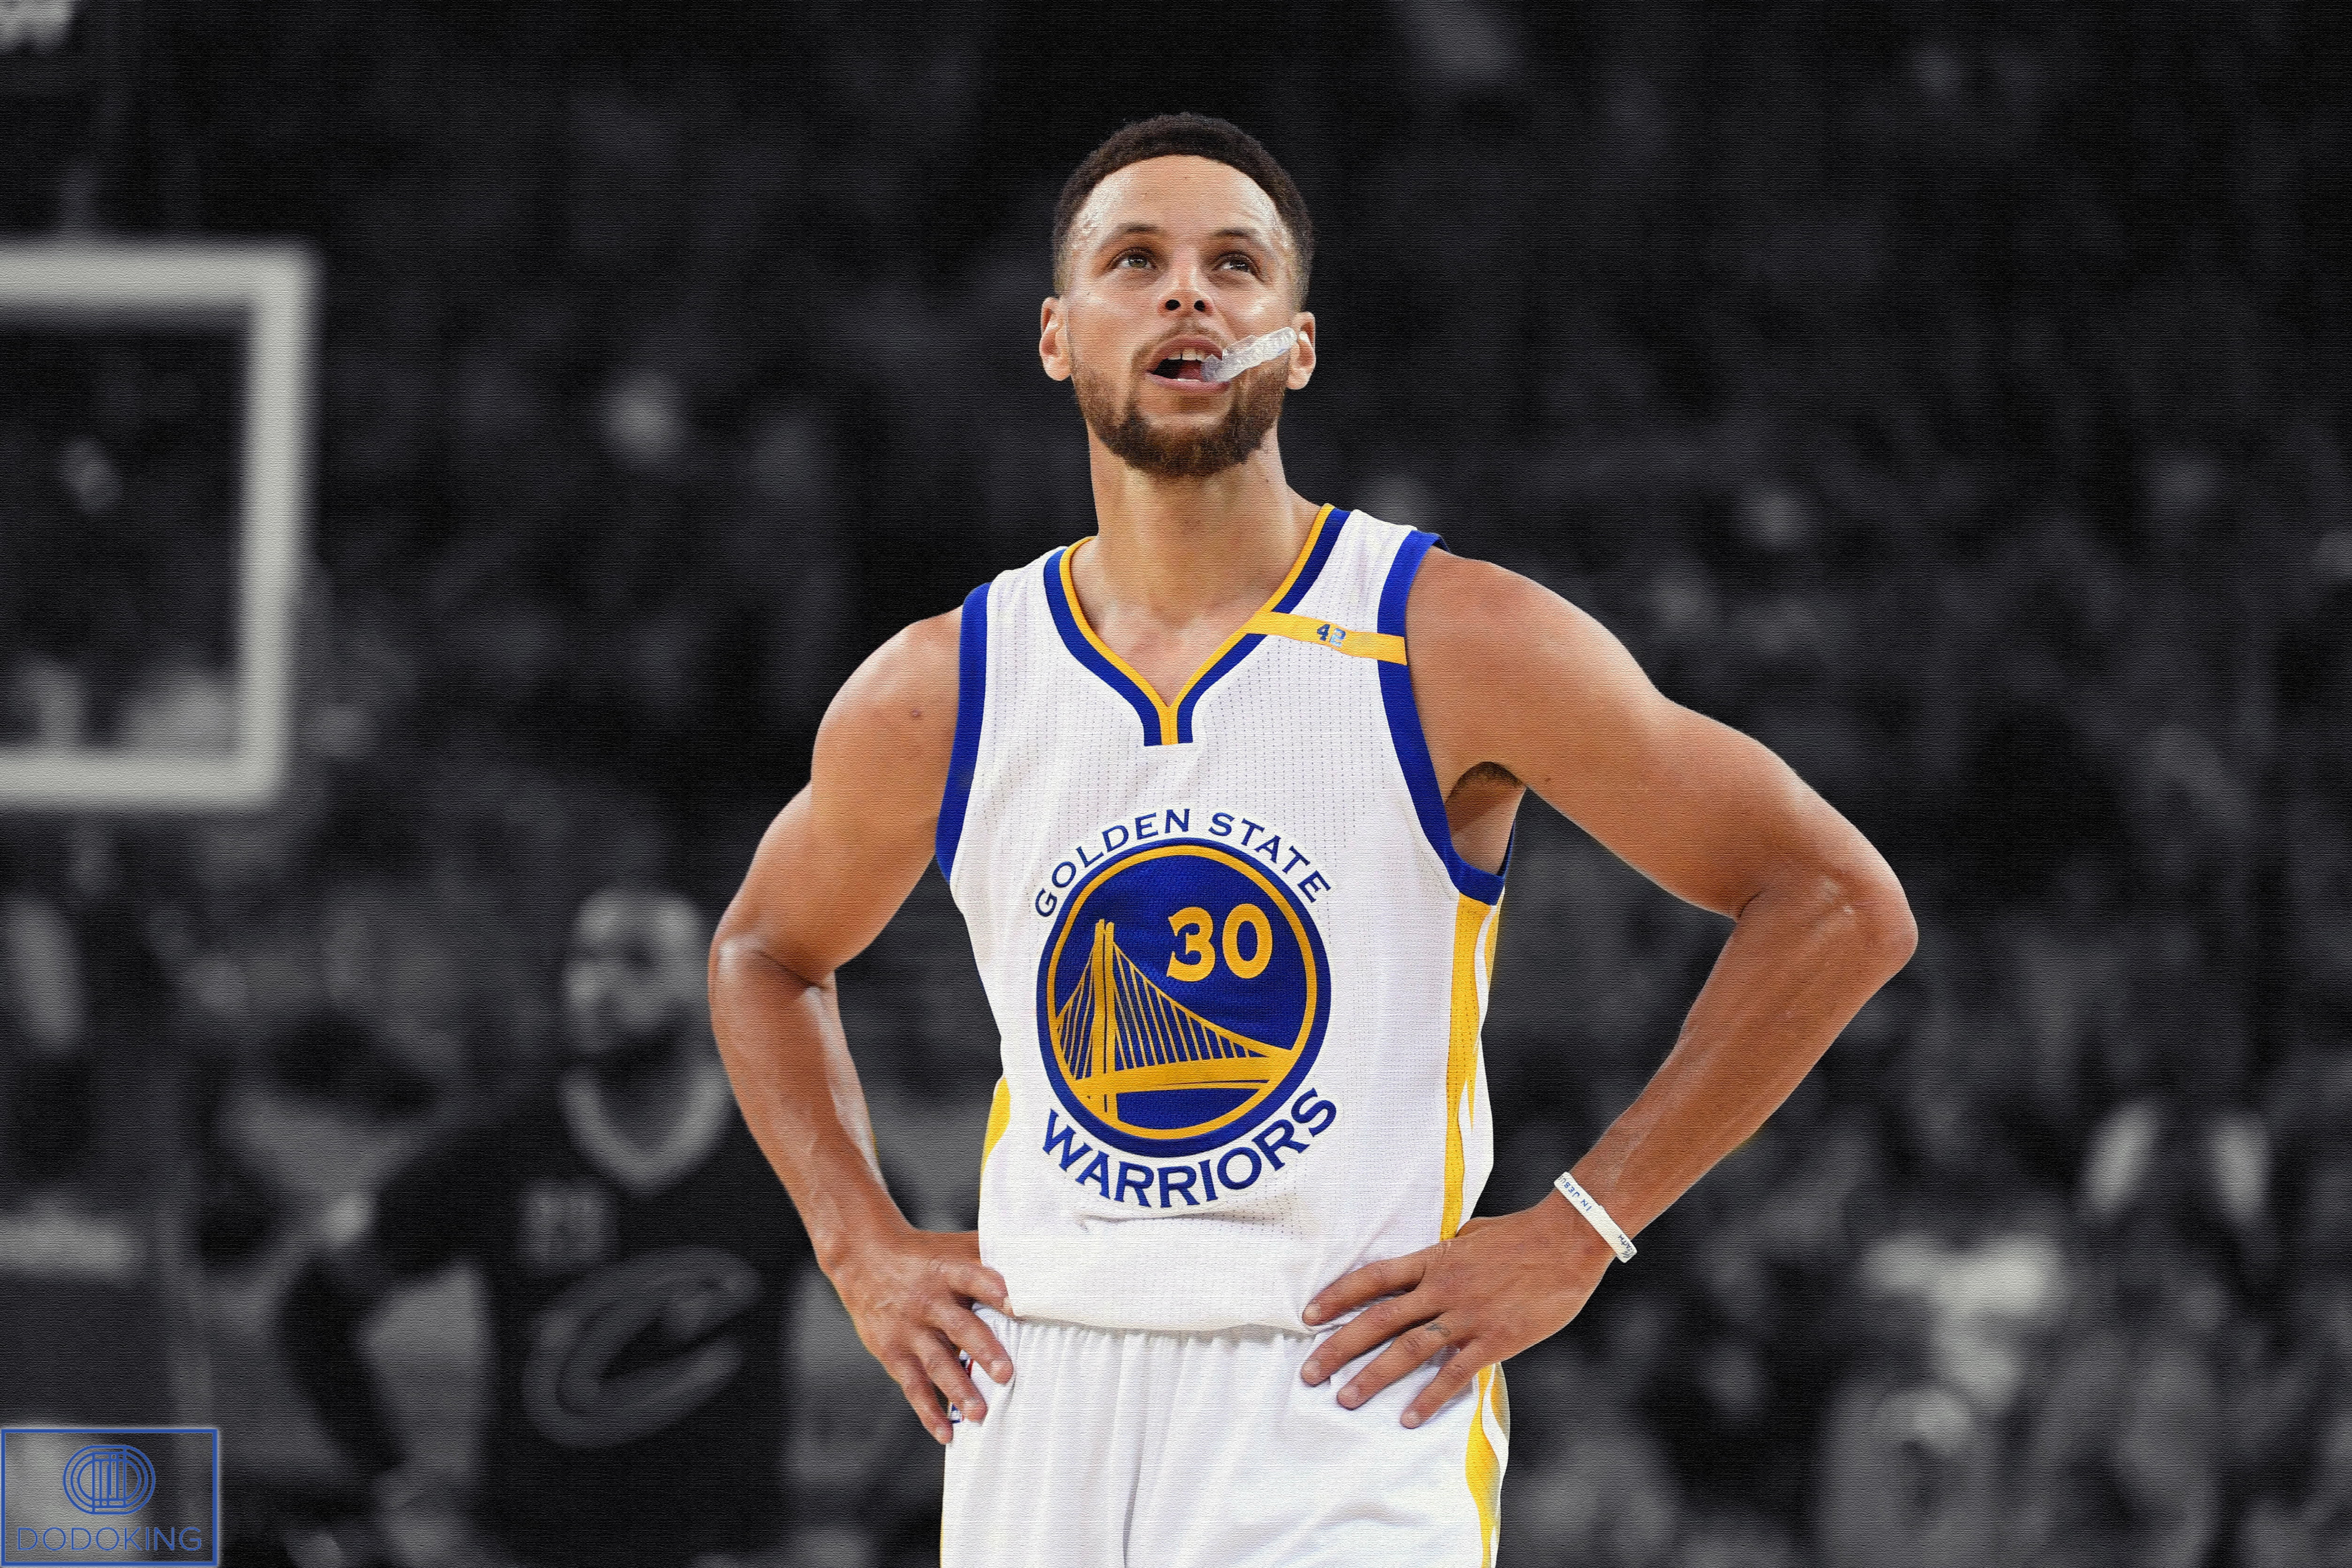 NBA, Stephen Curry, selective coloring, basketball, Golden State Warriors